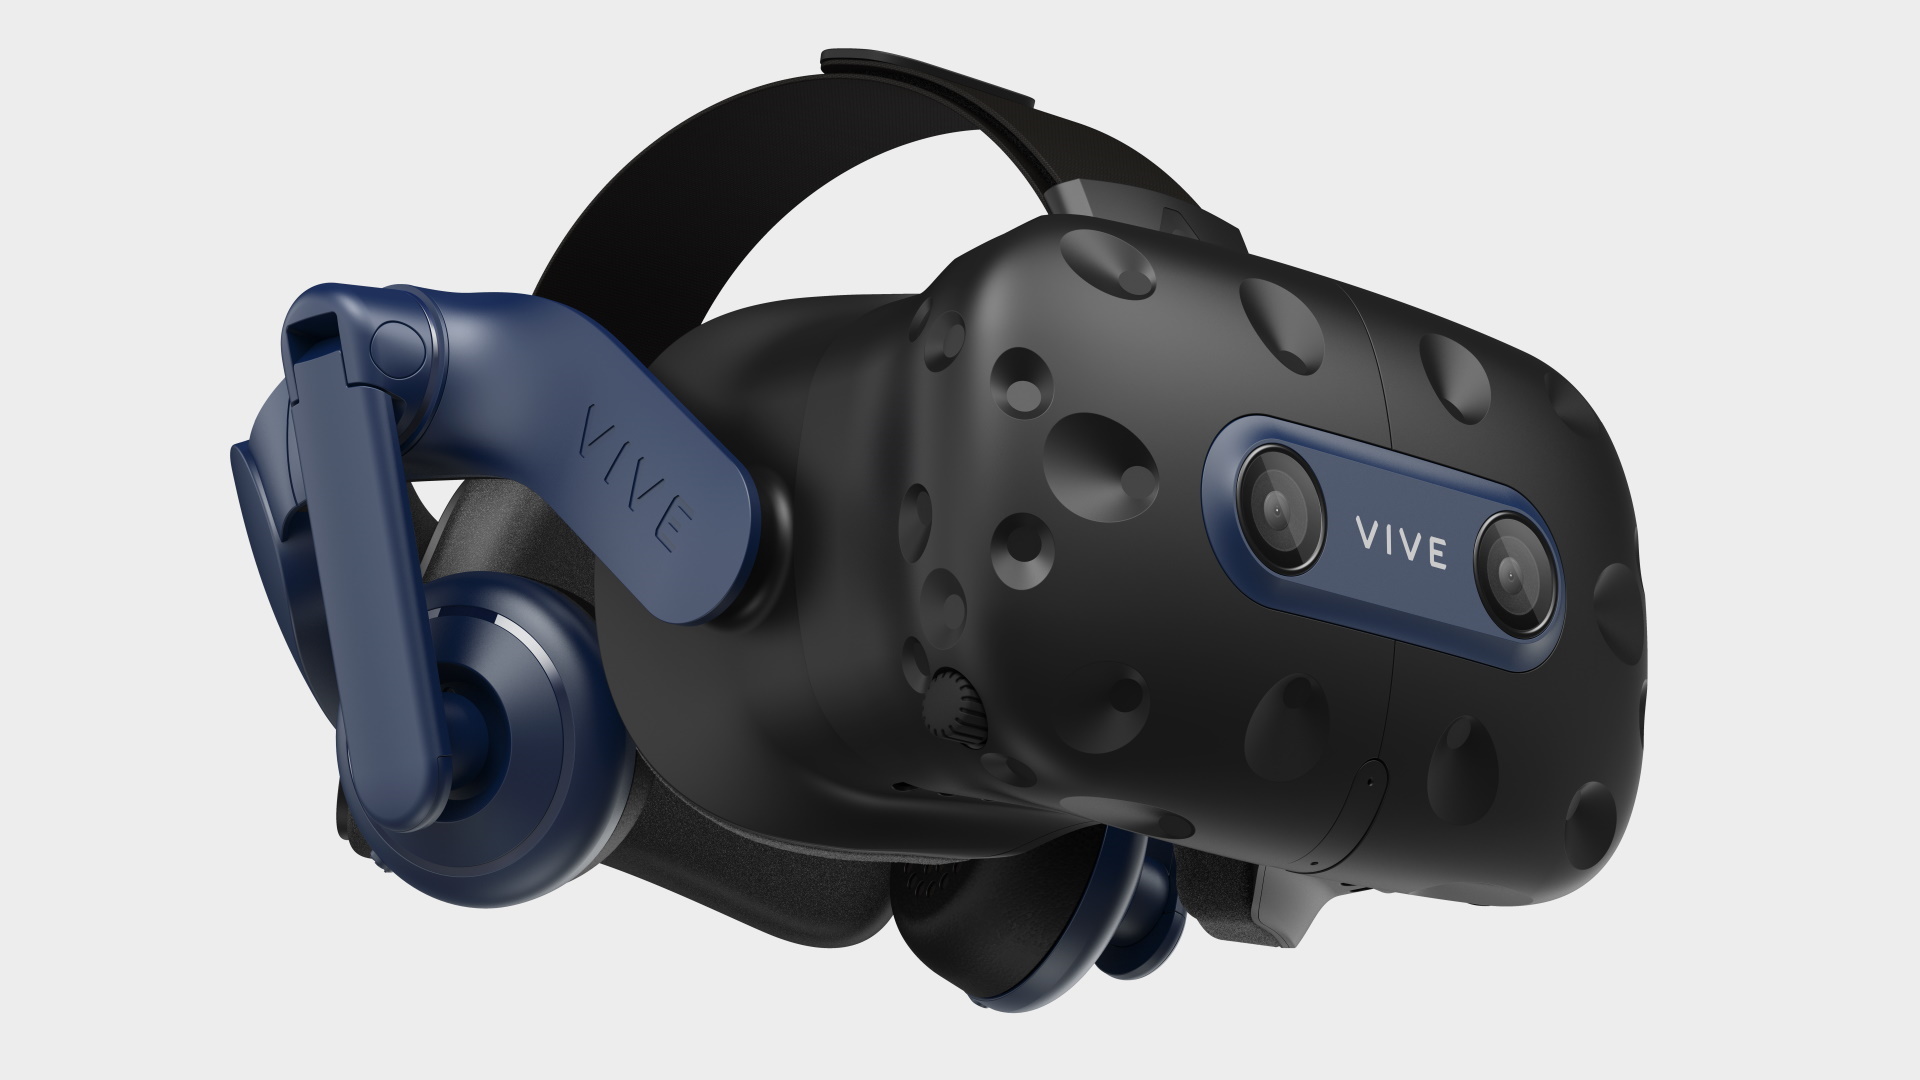 HTC's new Vive Pro 2 headset comes with a beefy specs list... and price